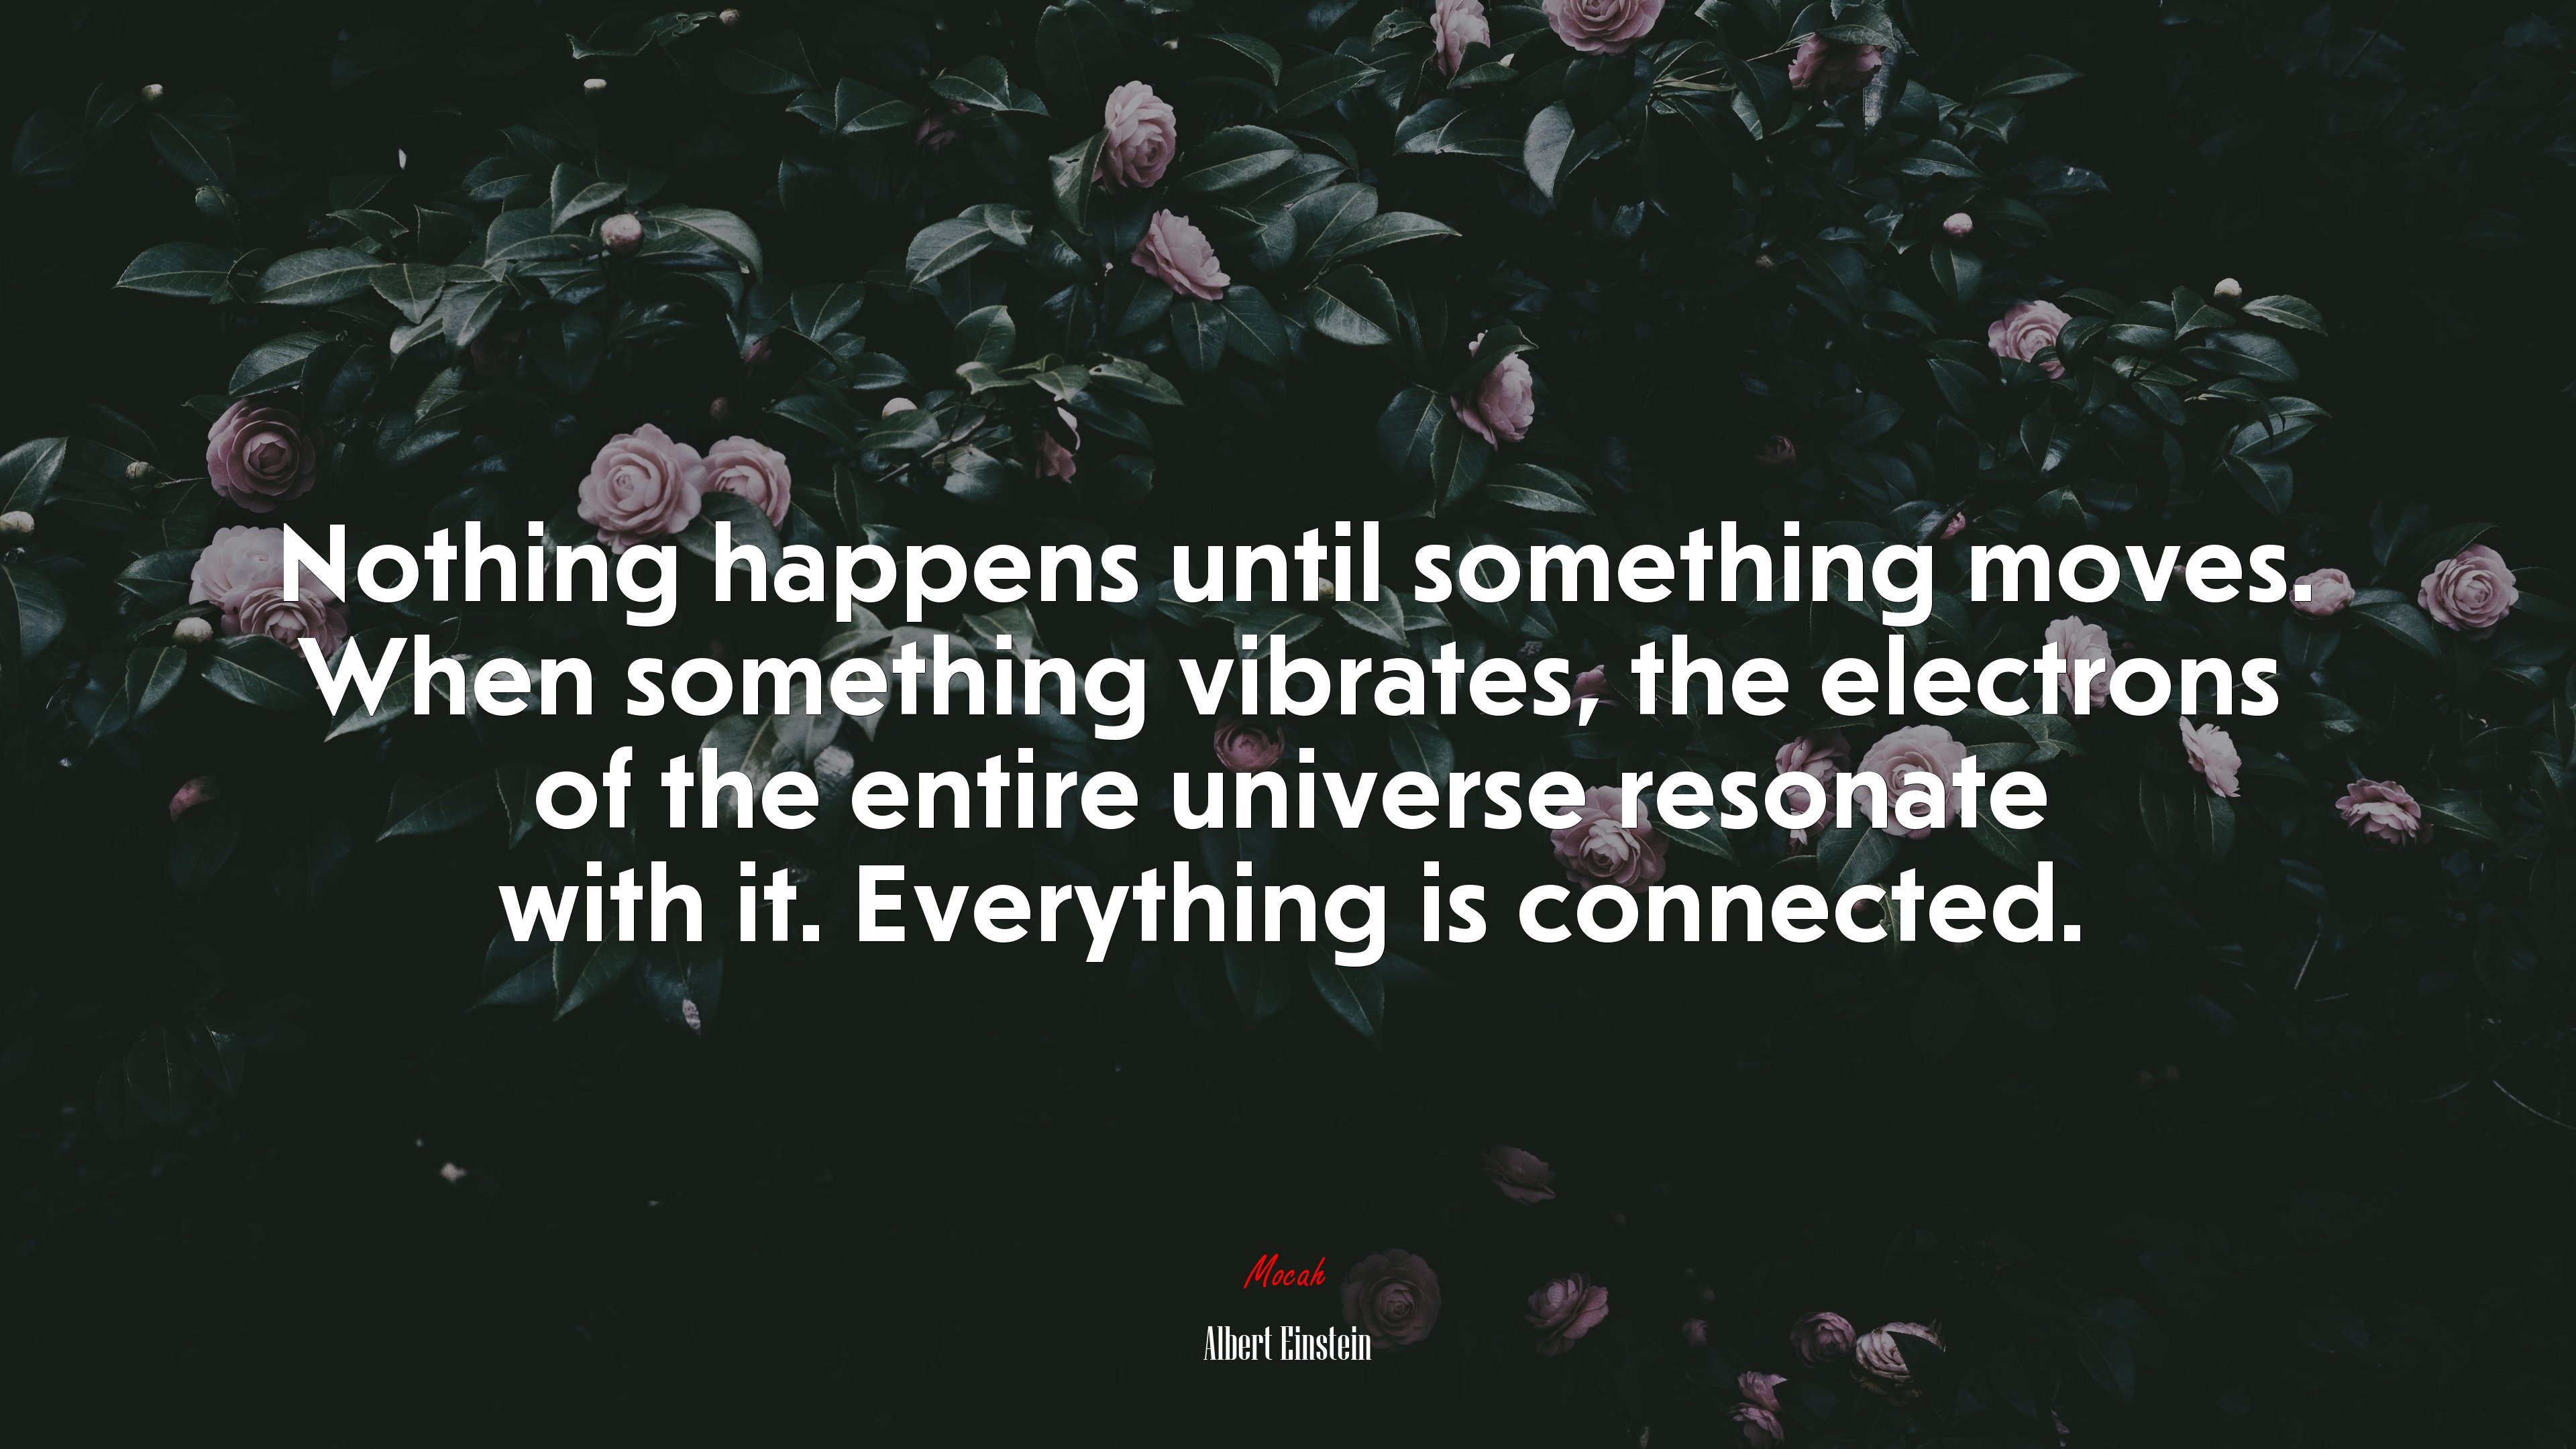 Netflix Dark Everything Is Connected Wallpapers